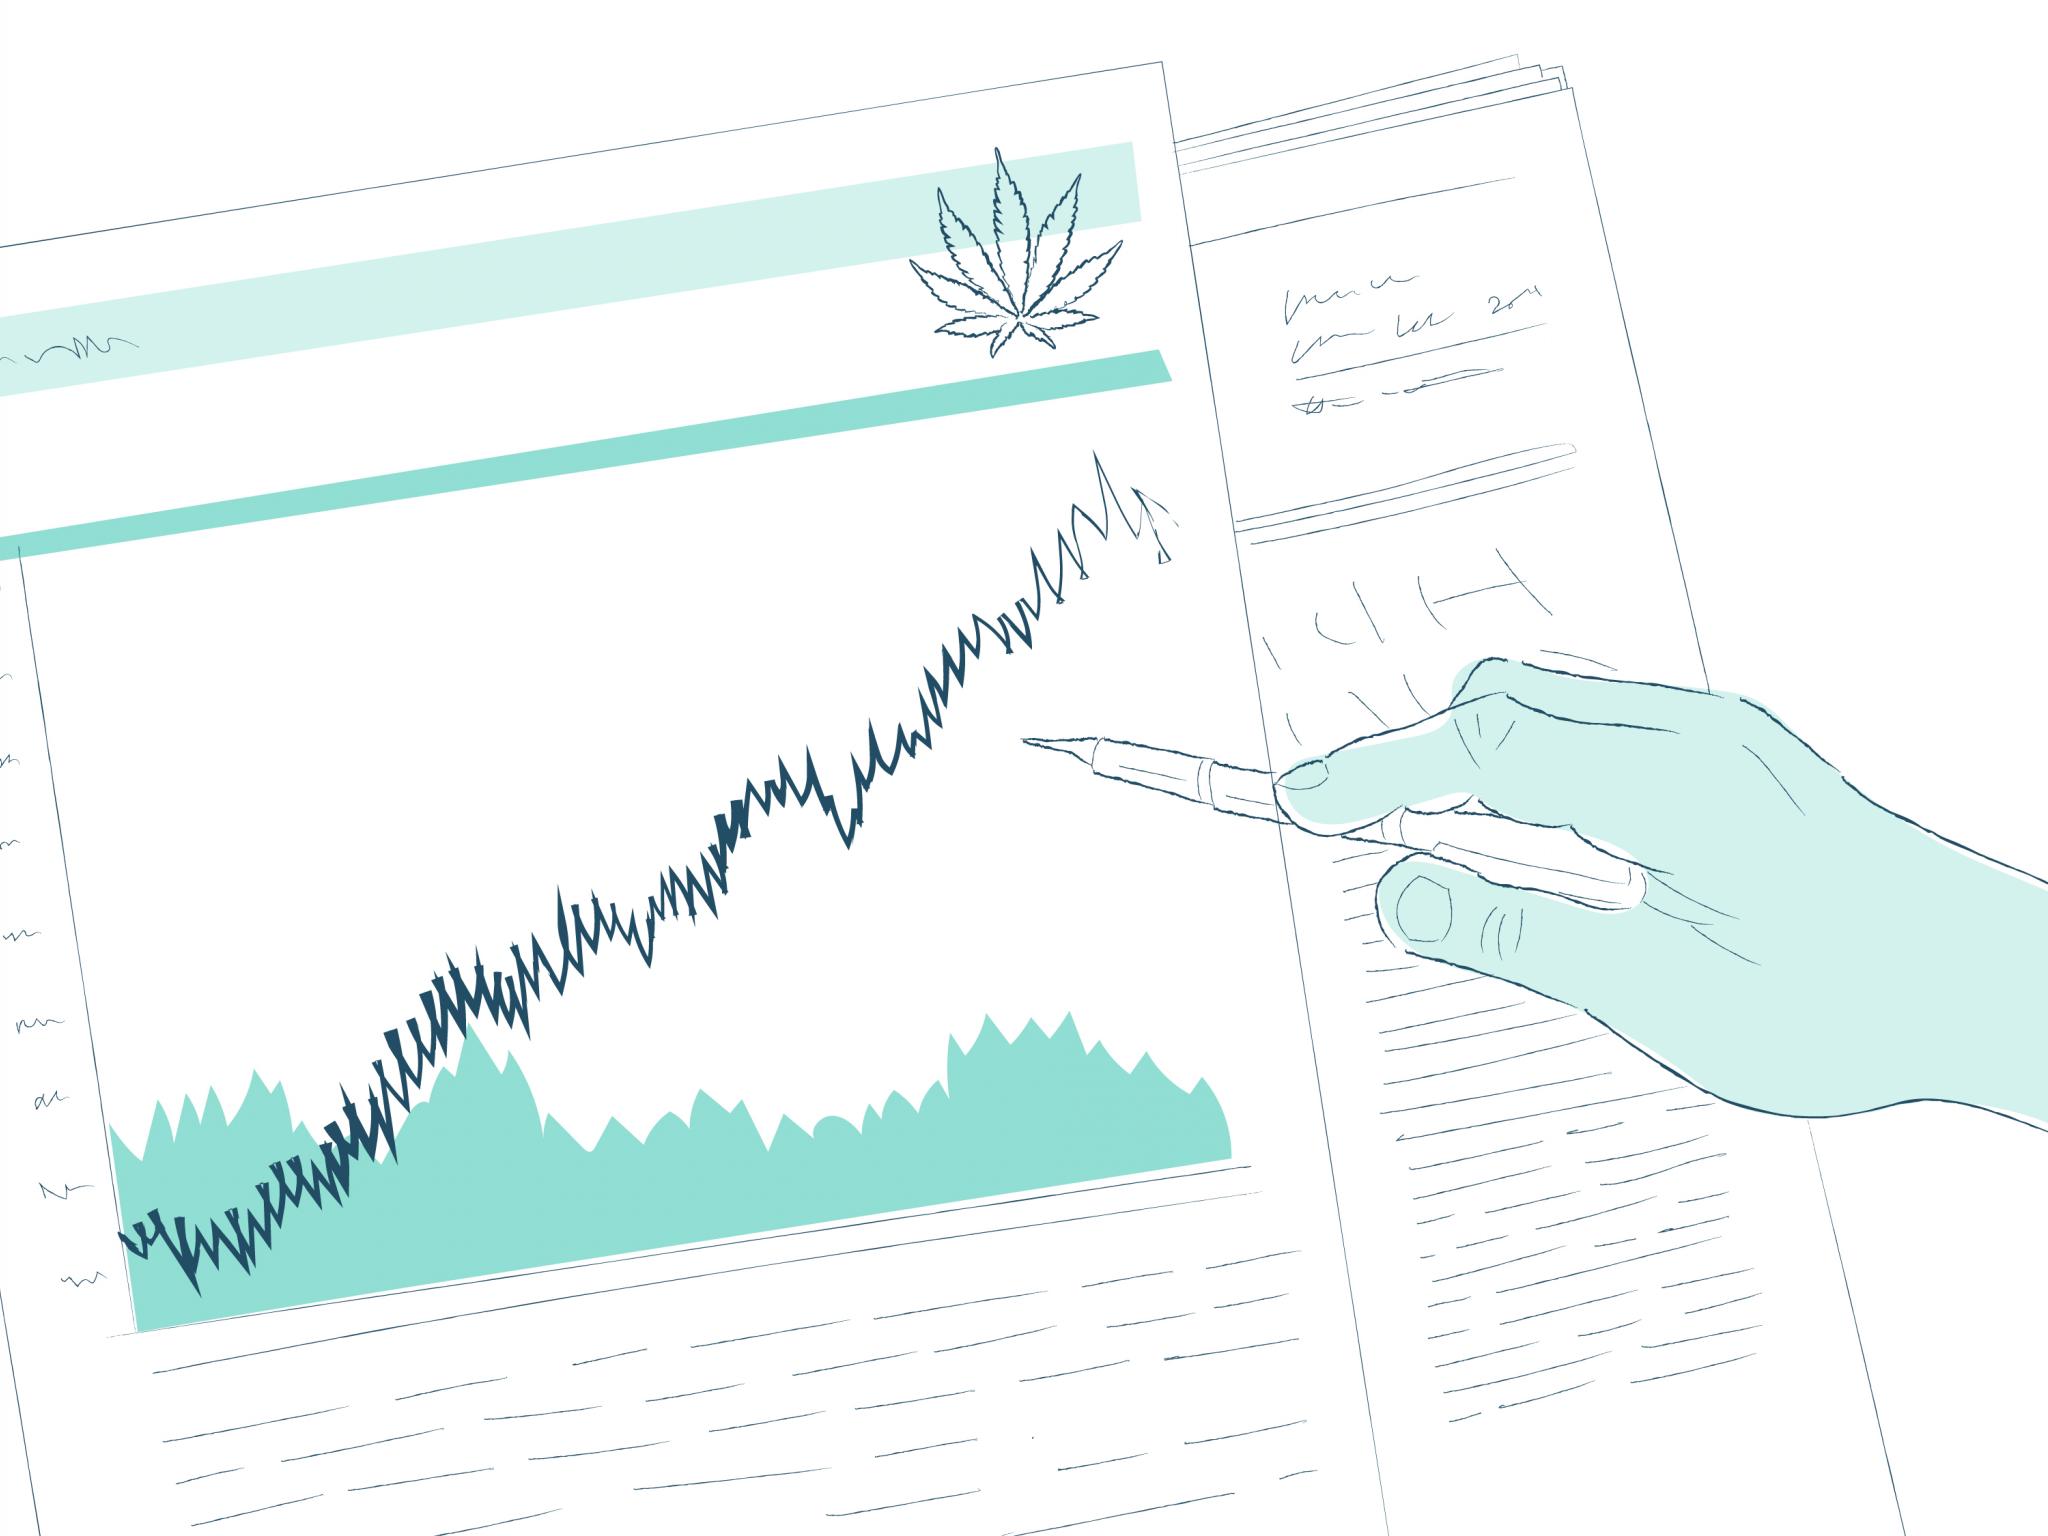  cannabis-stock-gainers-and-losers-from-april-21-2021 